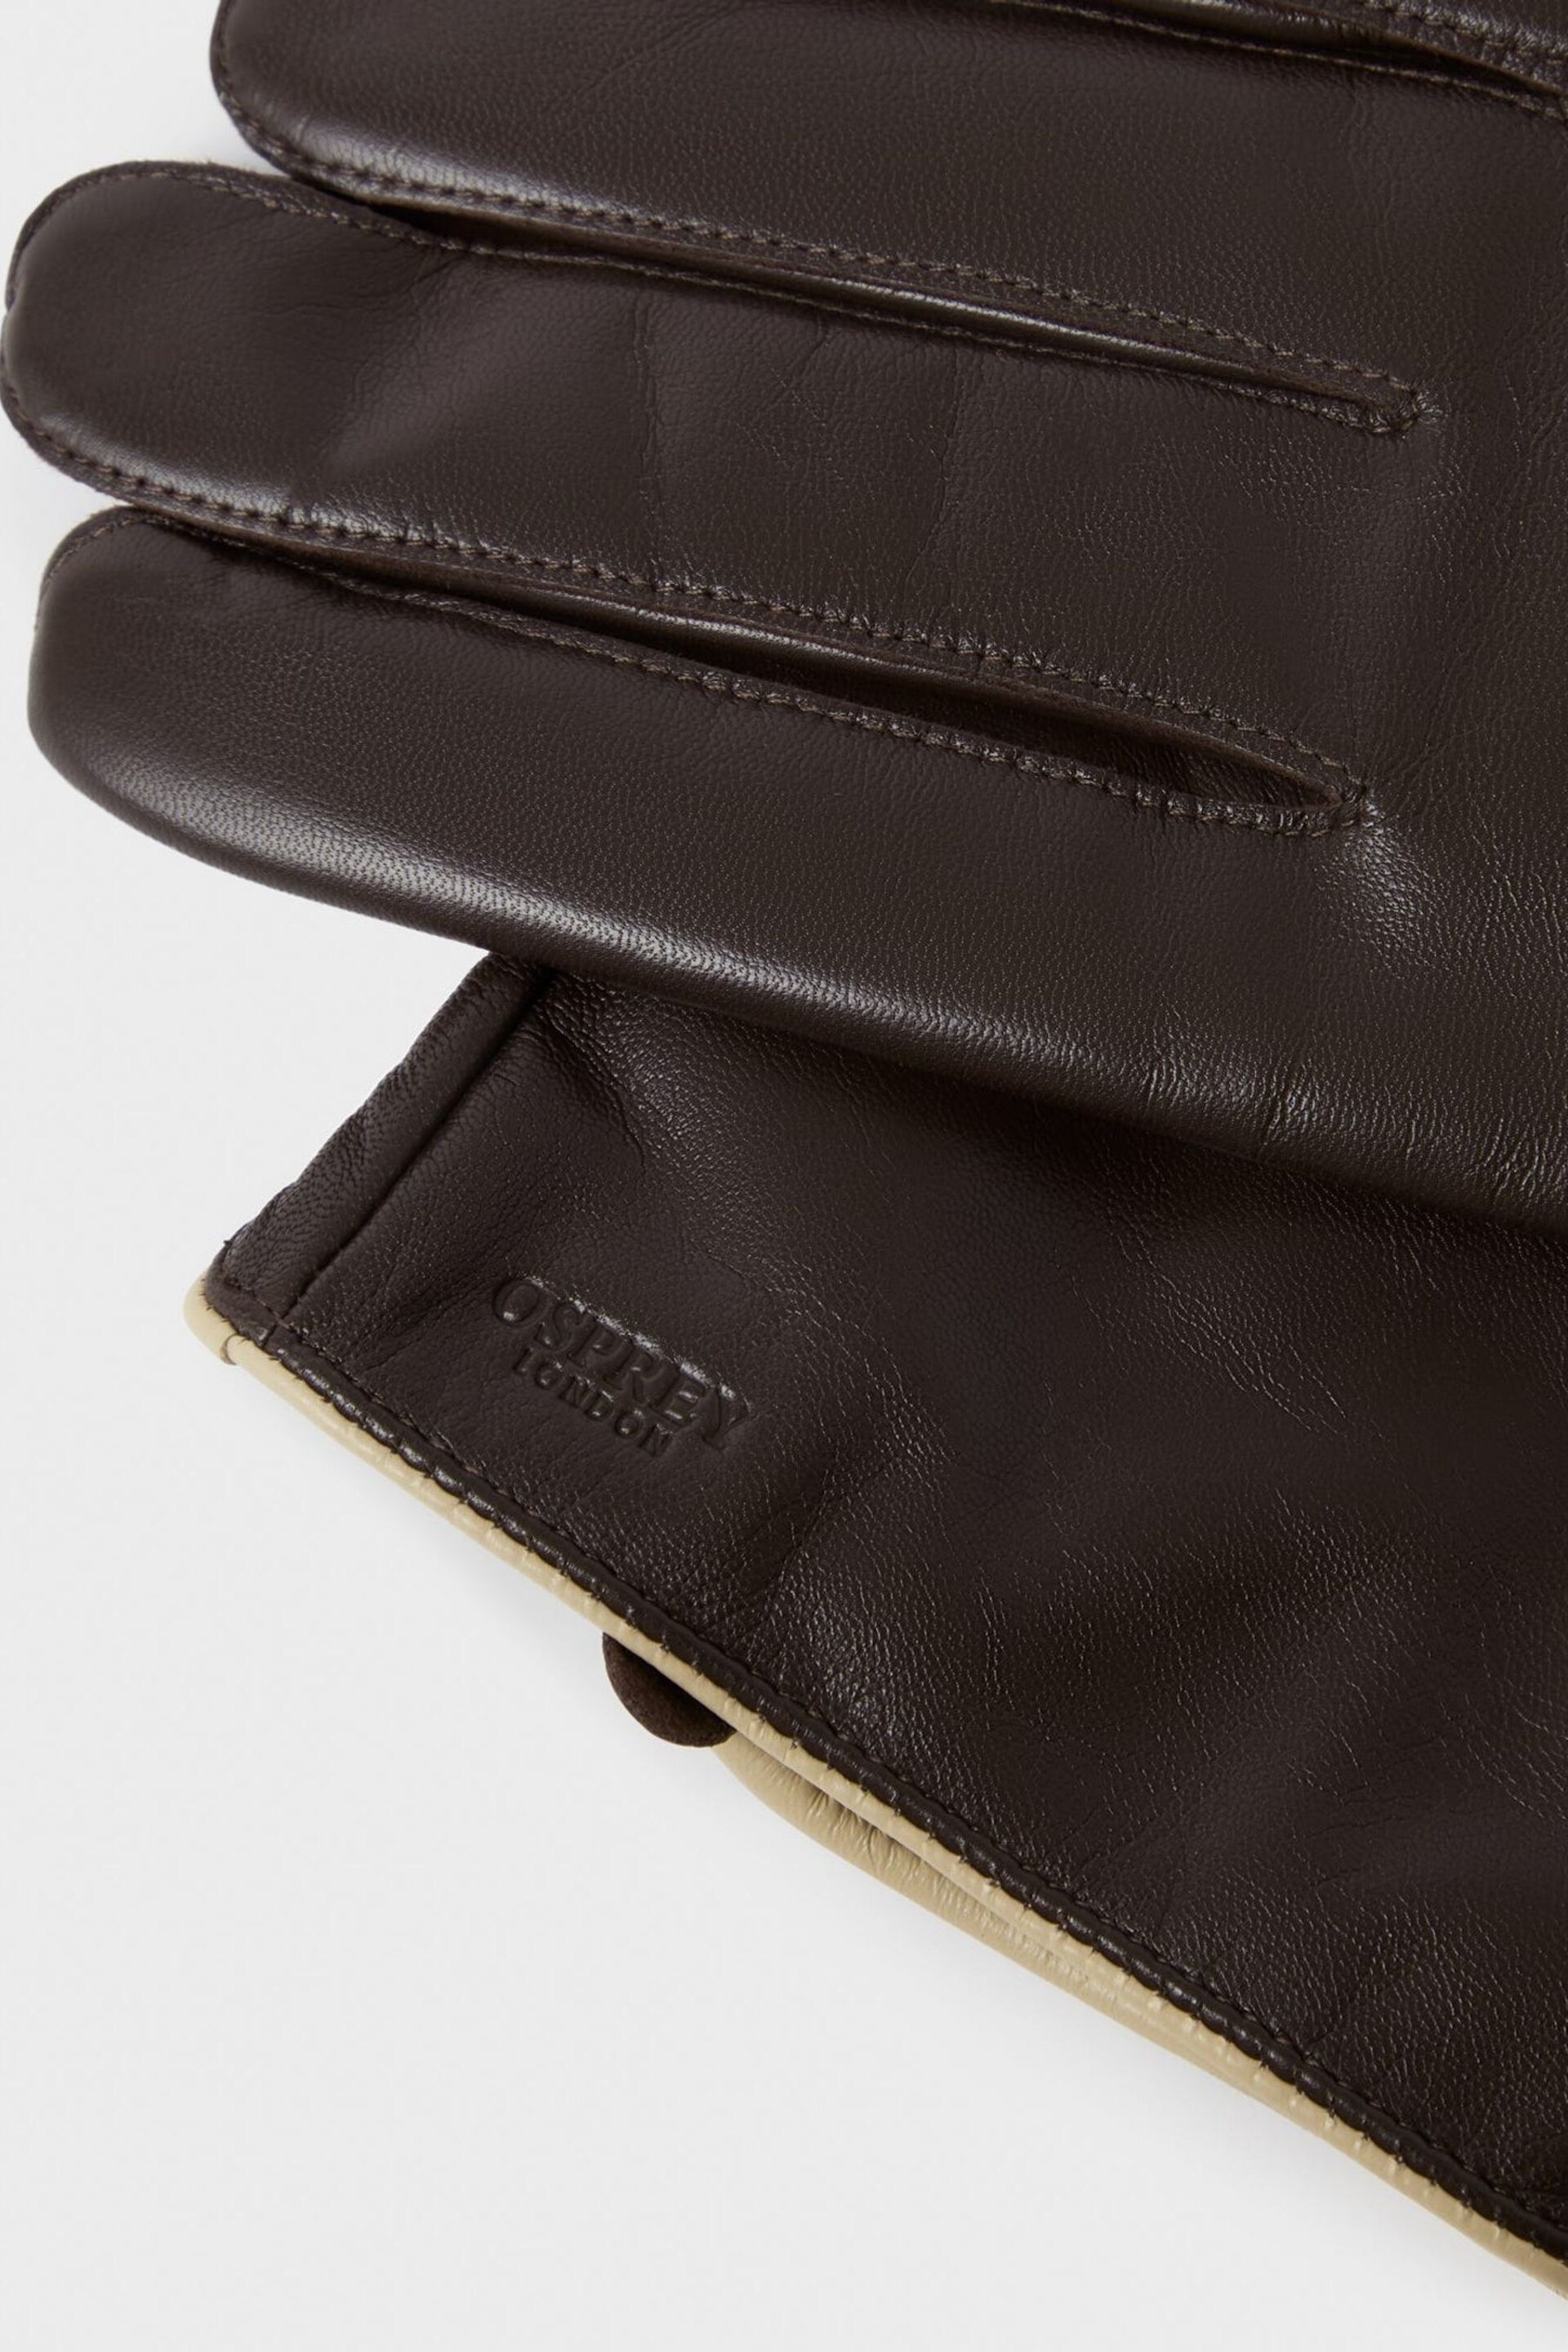 Osprey London The Ralph Leather Gloves - Image 4 of 4